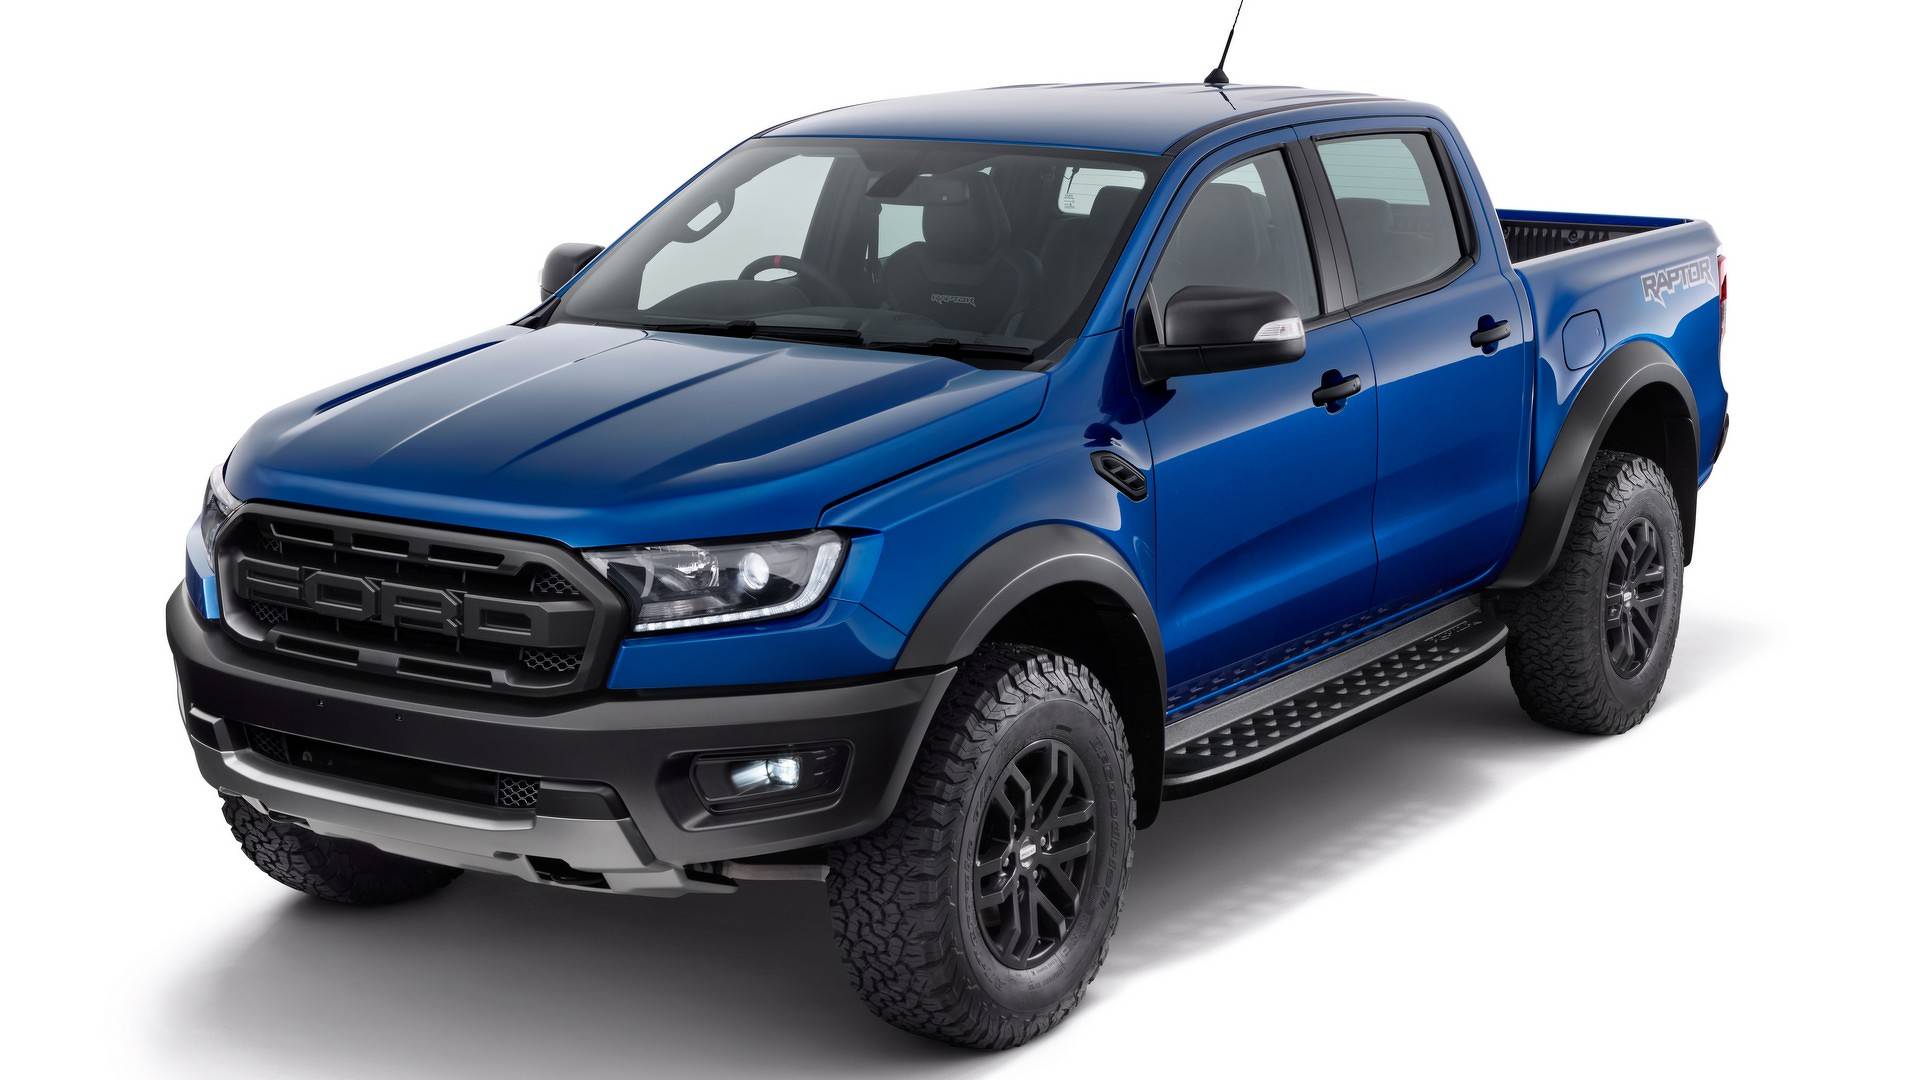 Ford Ranger Raptor Almost Had A 13-Speed Gearbox